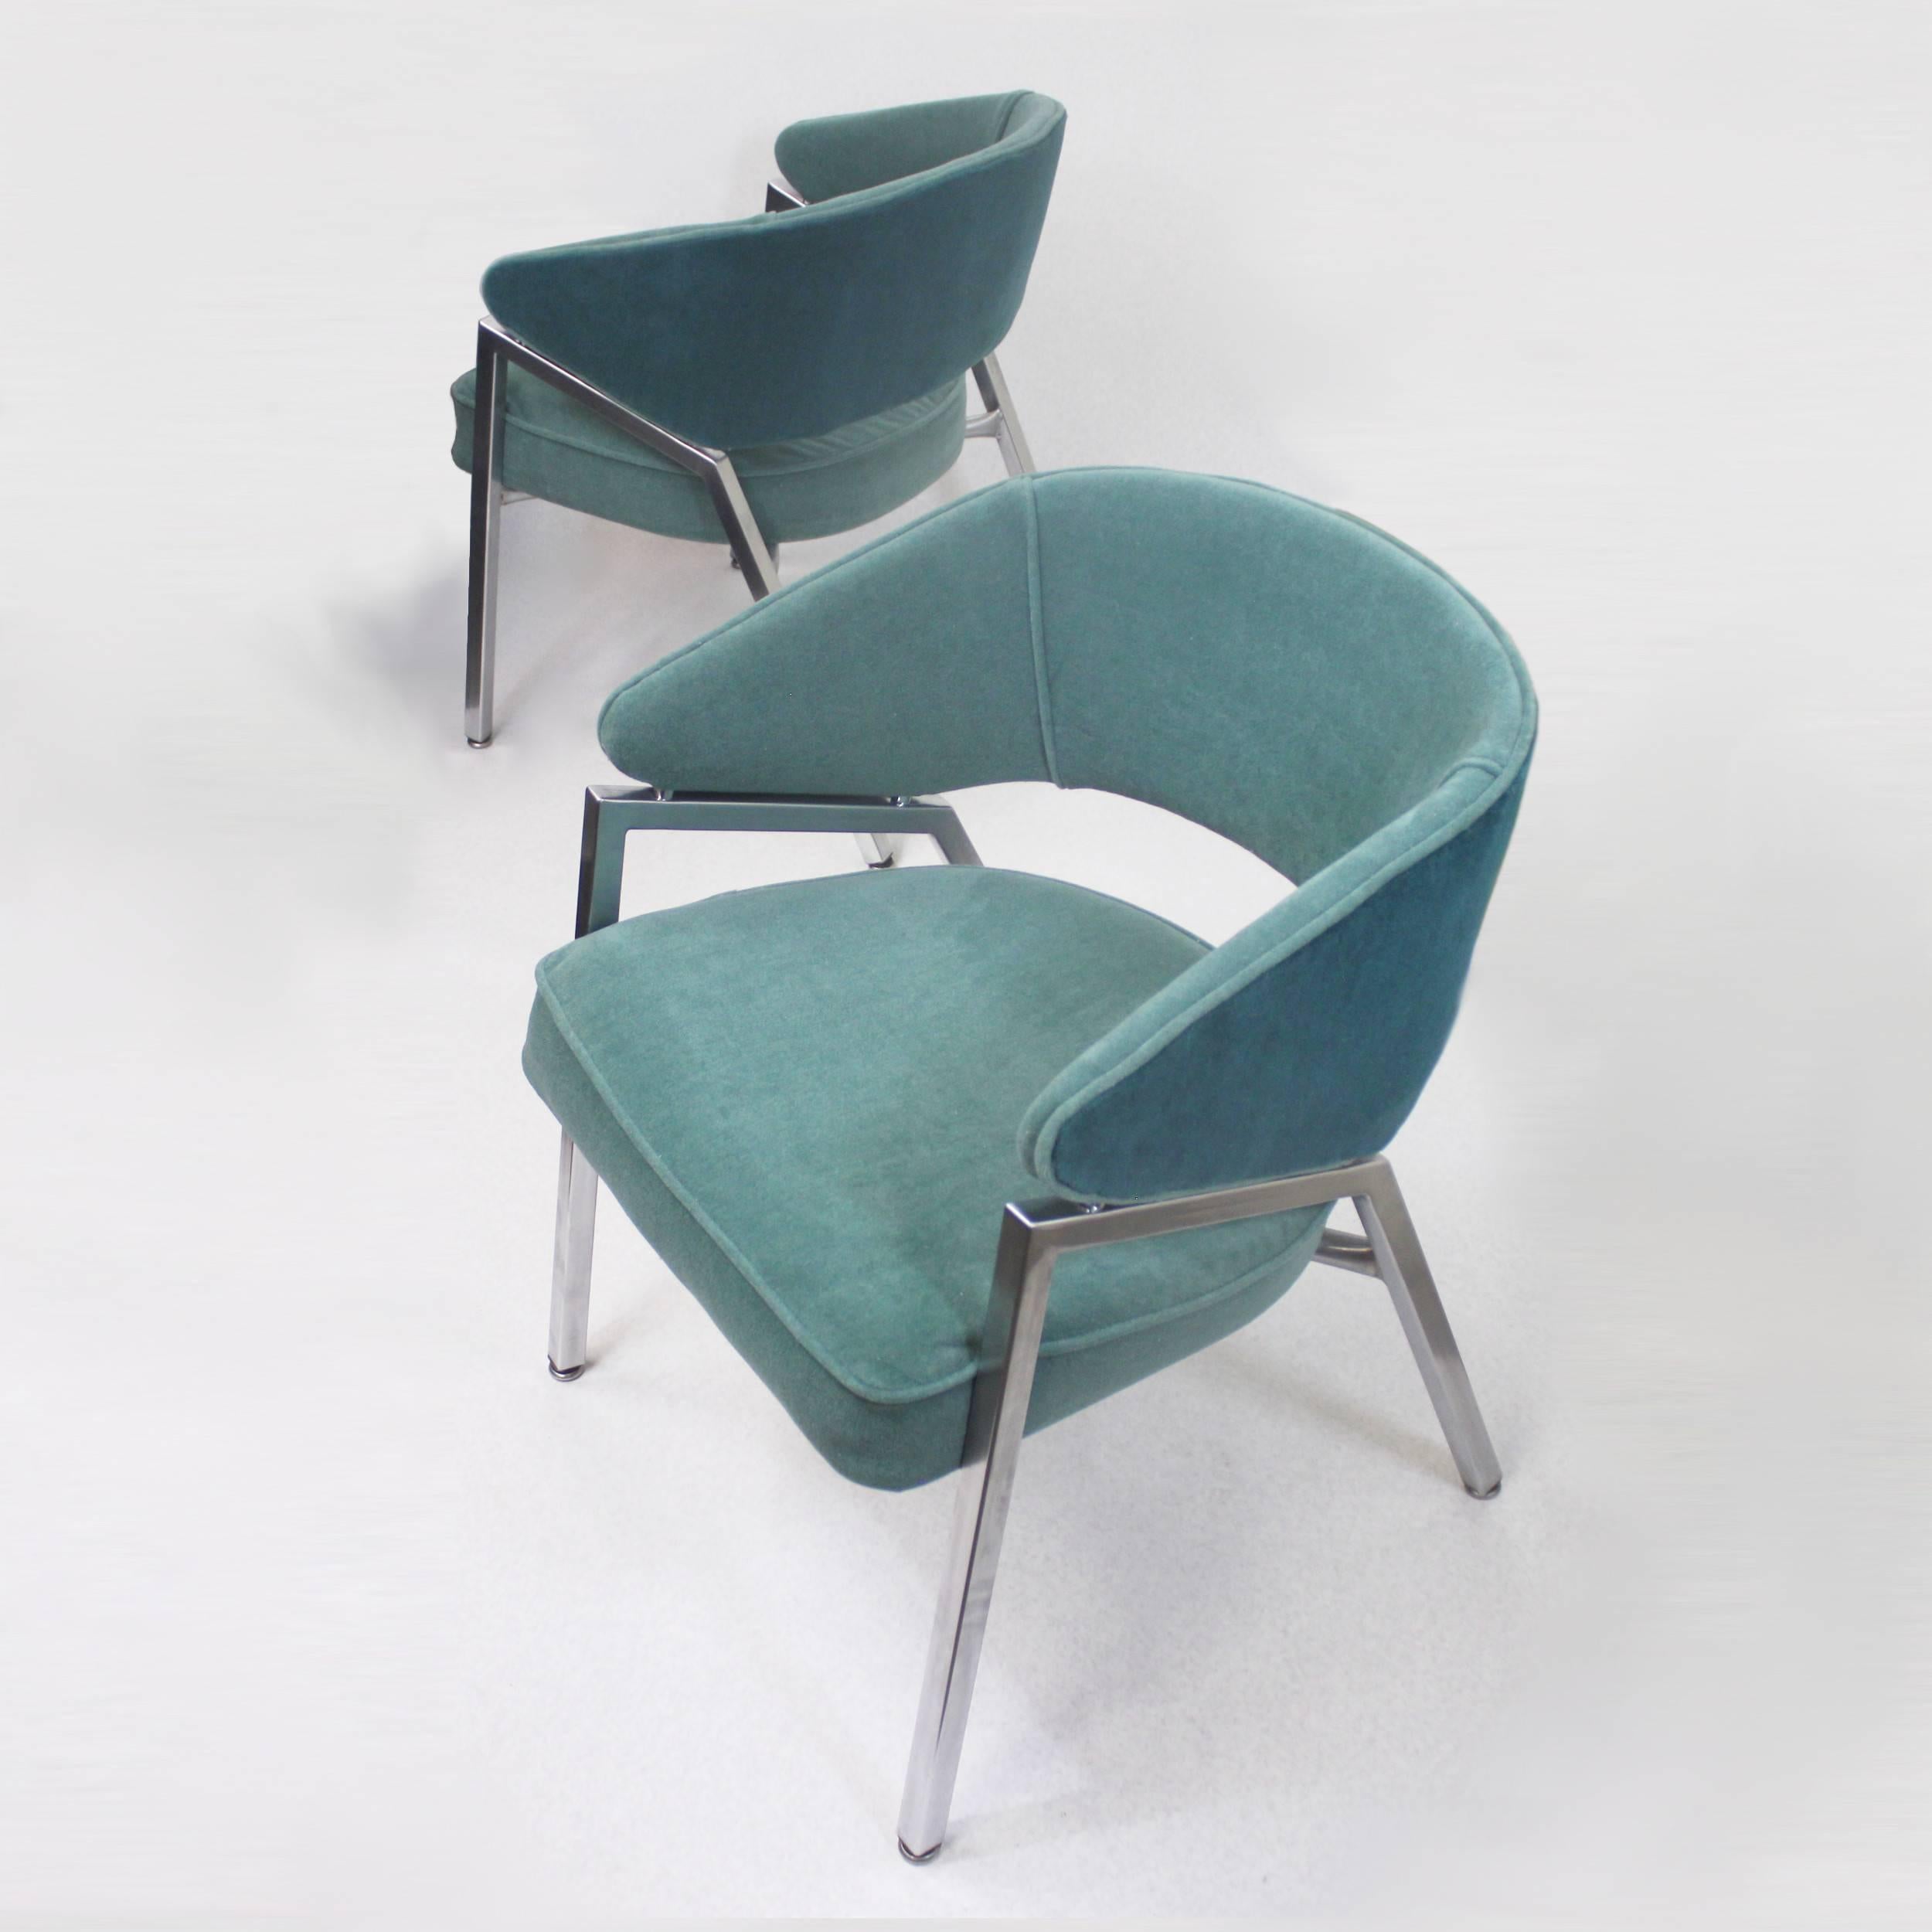 This rare pair of chrome side chairs by the Troy Sunshade Co. are fresh off a full restoration with new vintage, teal and green velour upholstery. The floating, two-tone backs are a unique design feature reminiscent of designs by Dutch Architect